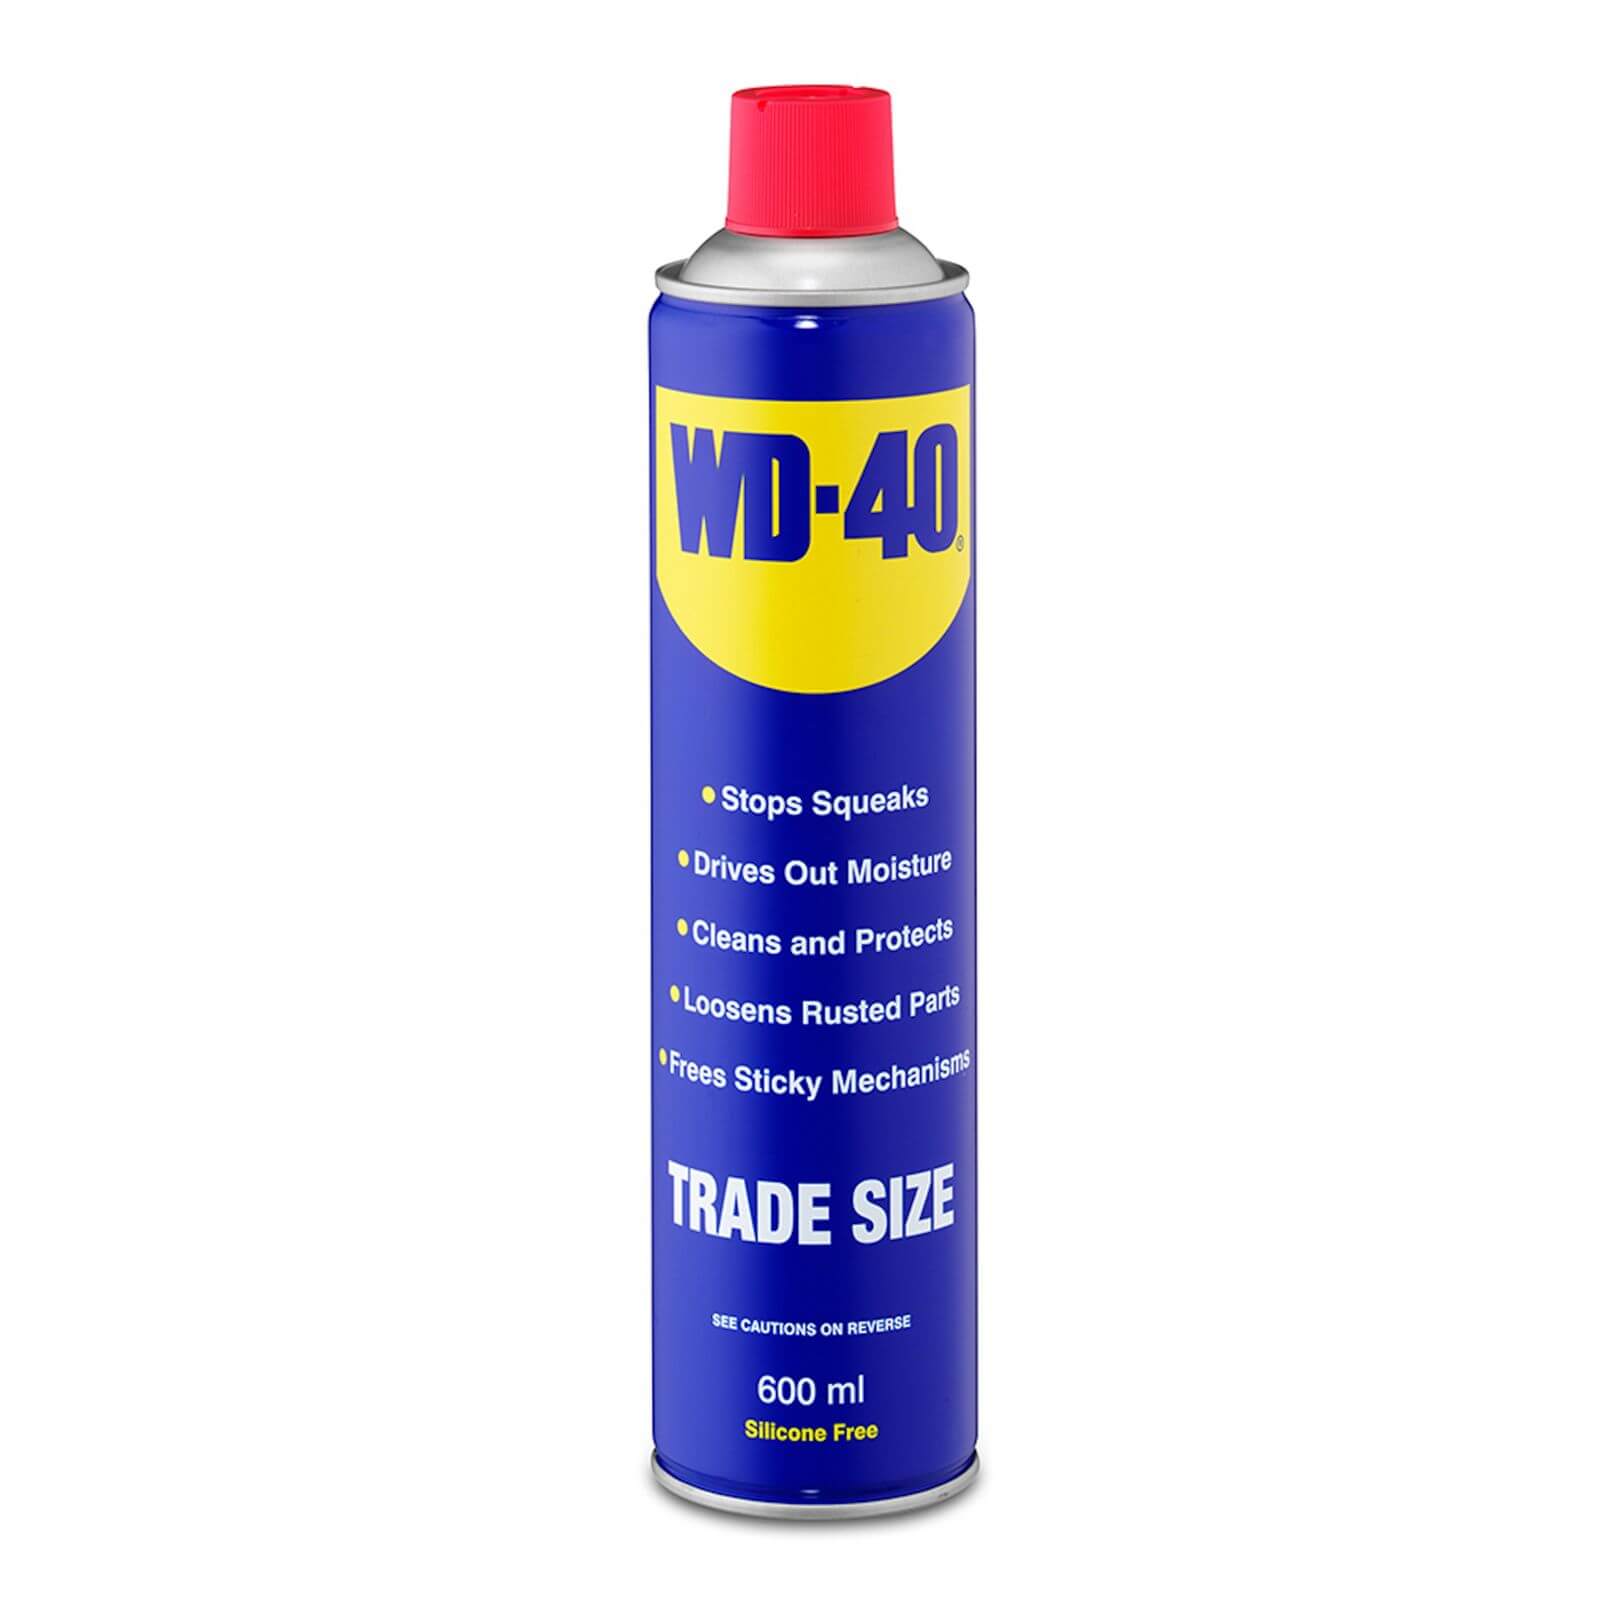 Photo of Wd-40 Trade Size - 600ml